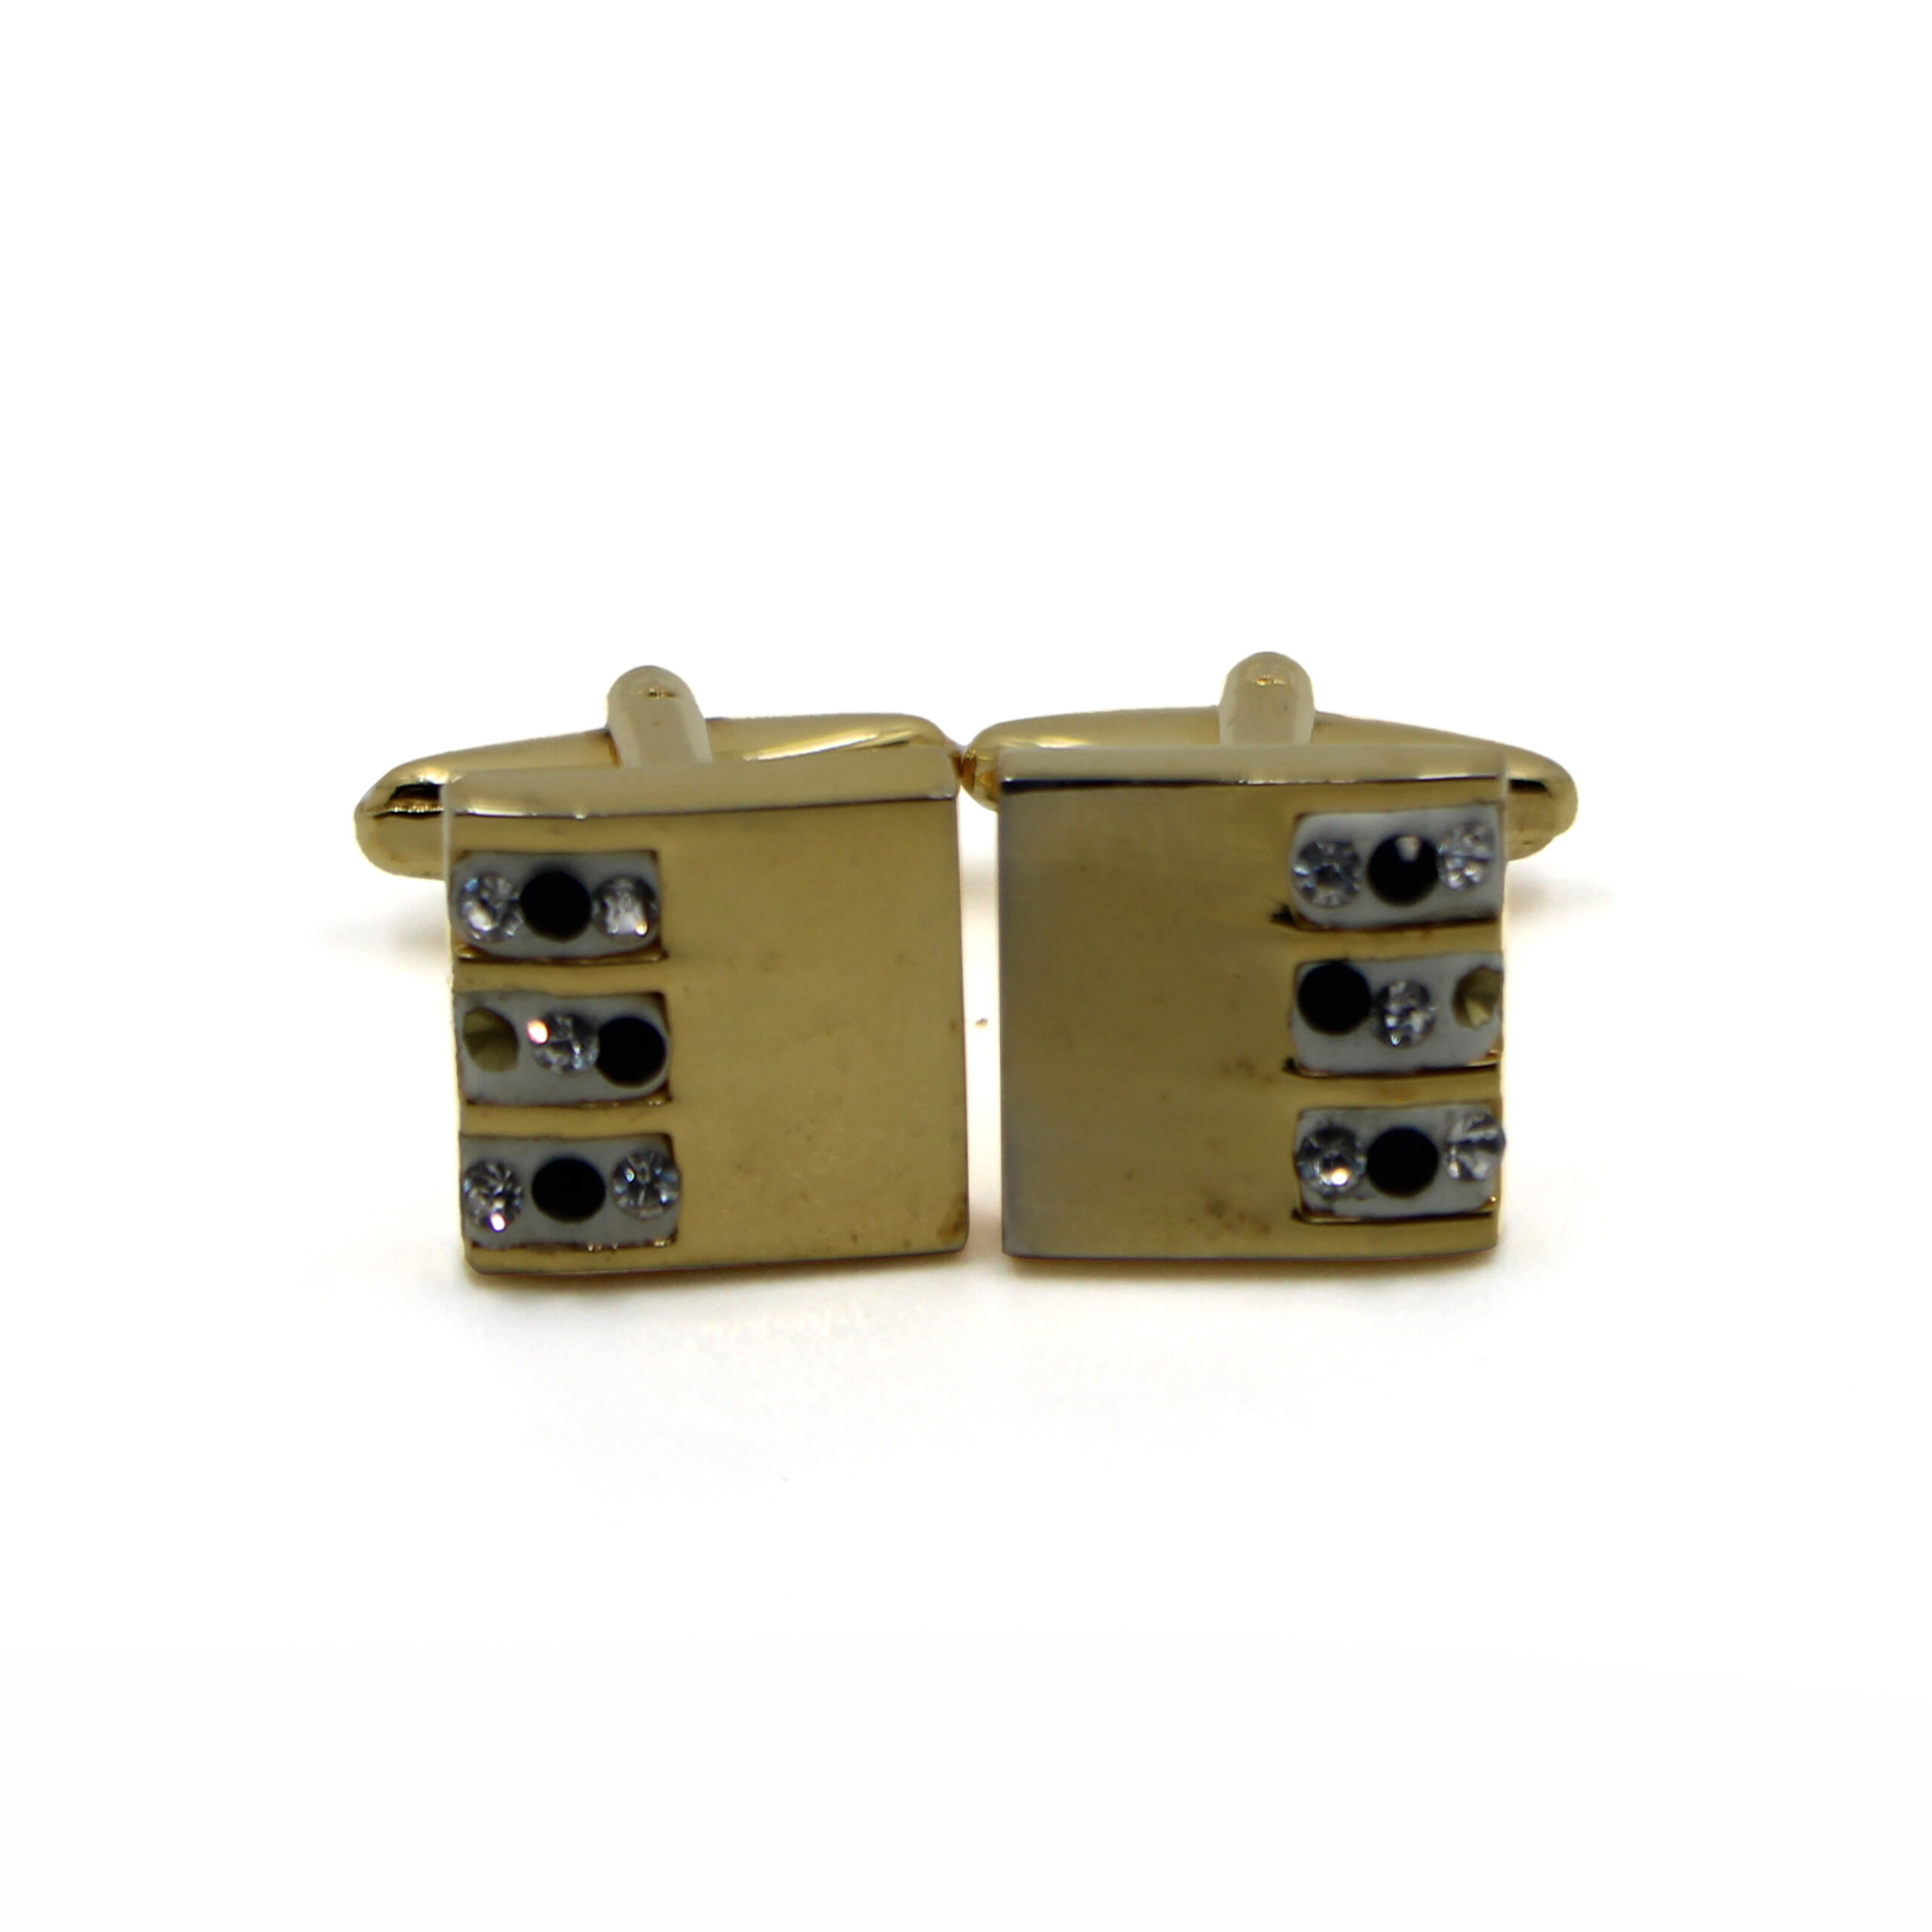 Cufflers Vintage Square Cufflinks with Free Gift Box – CU-1011 – Gold